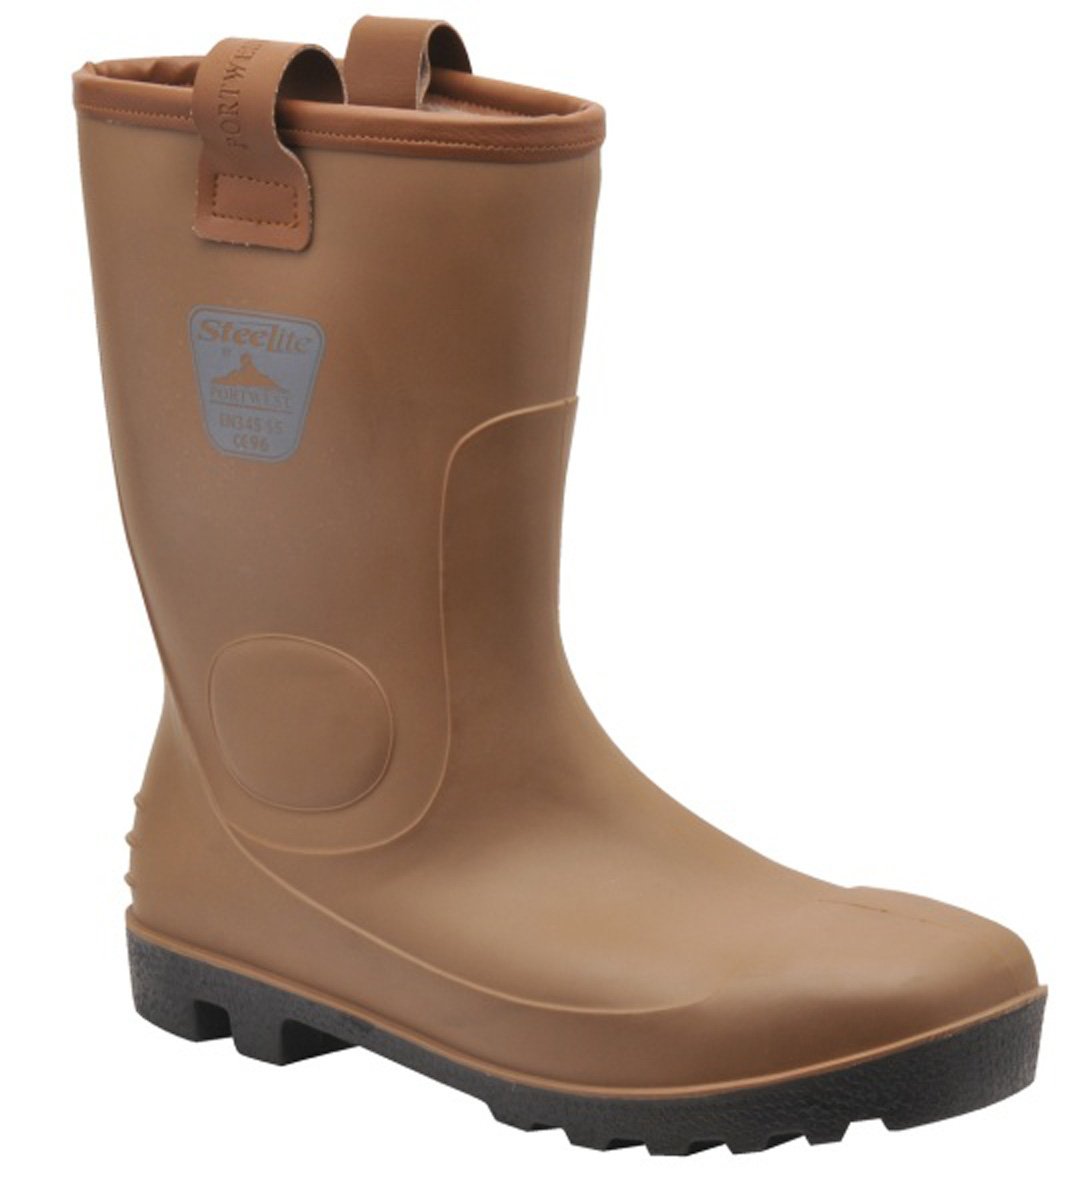 Neptune Safety Rigger Safety Boots S5 CI SRC